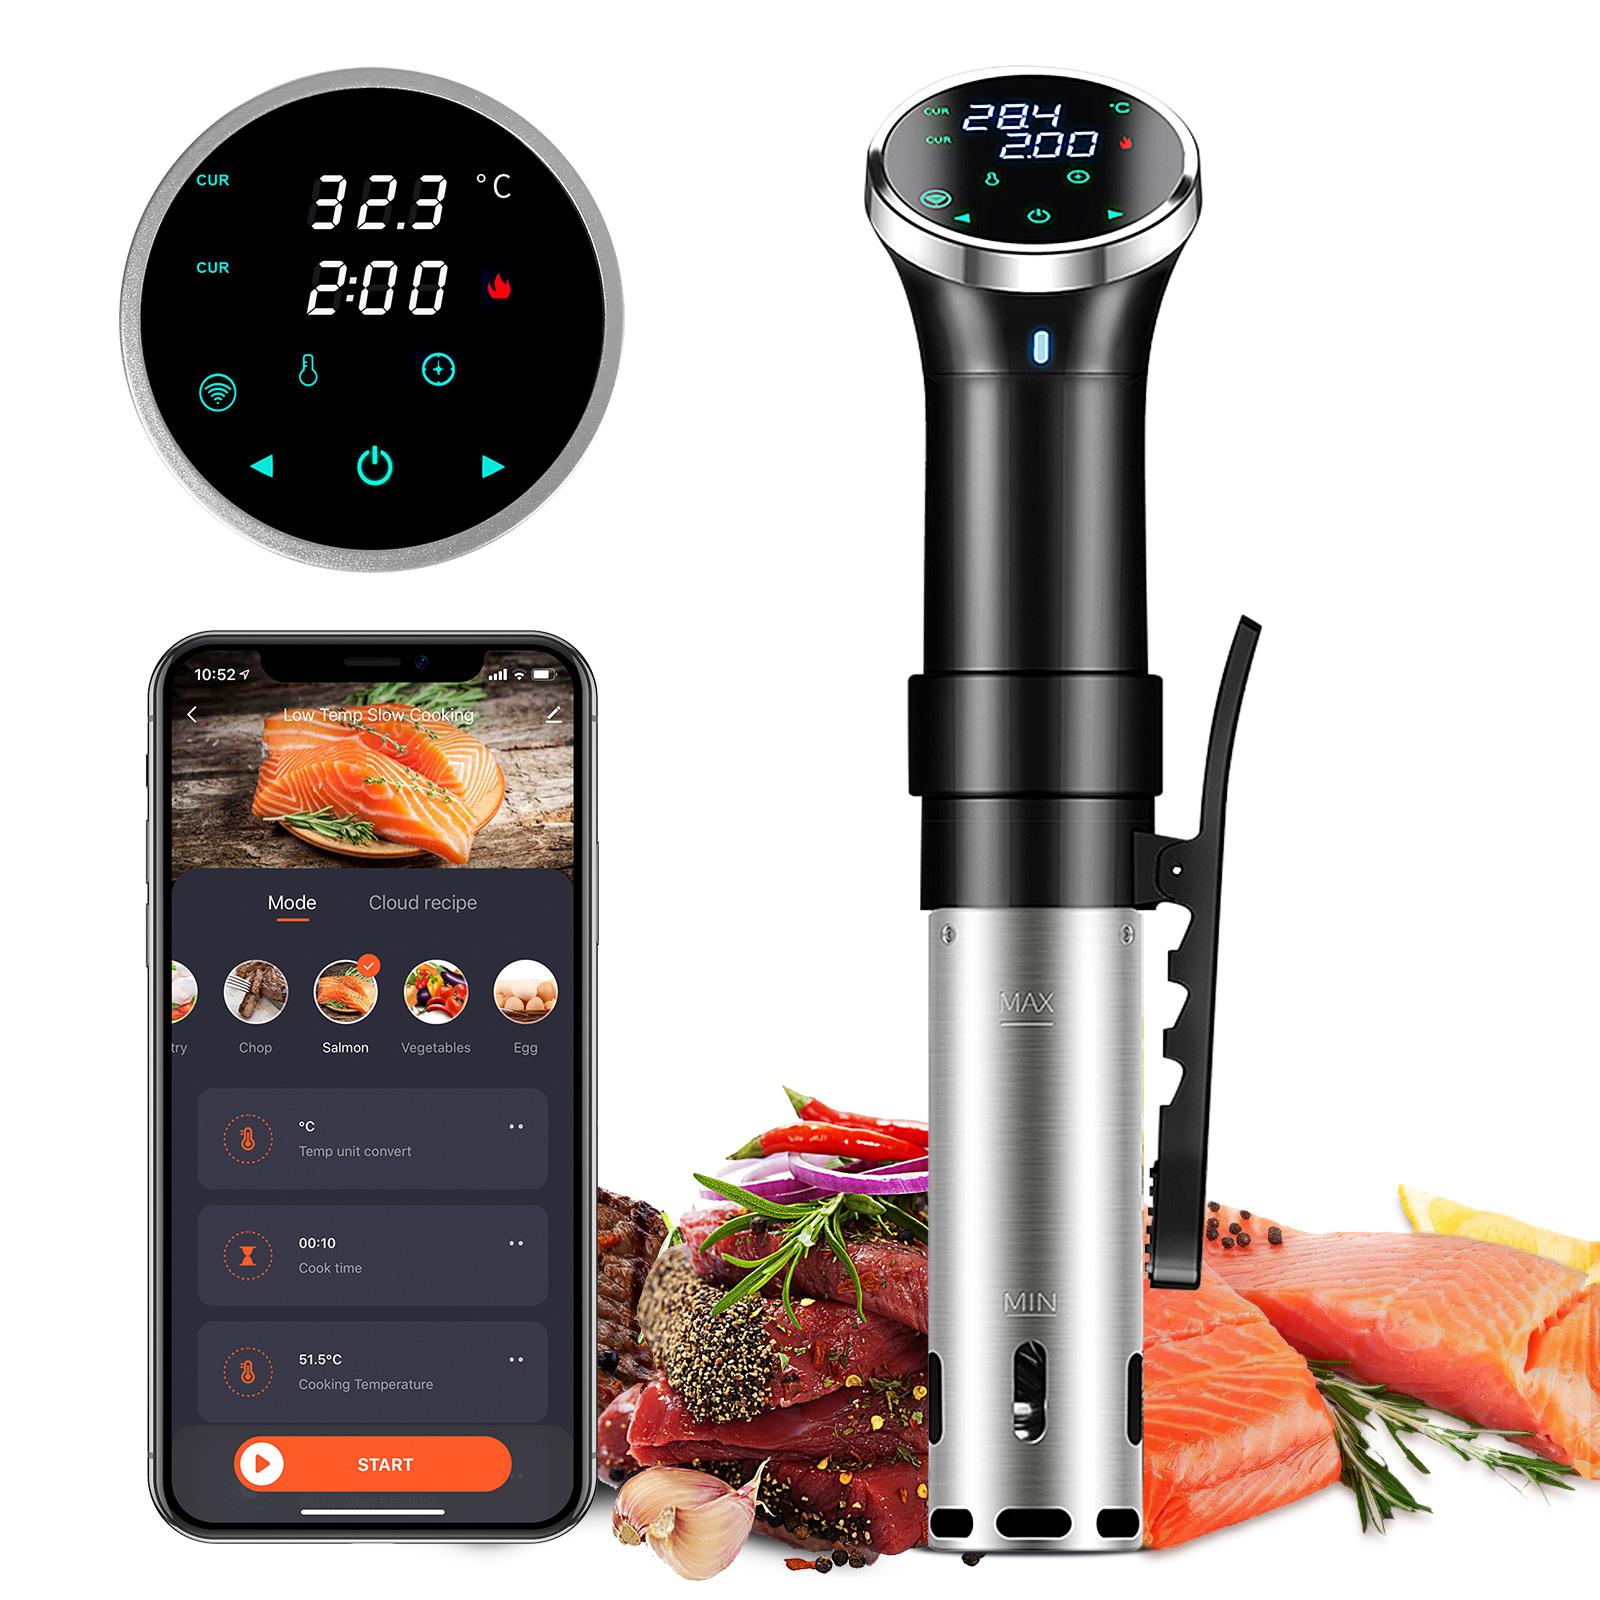 HoldPeak Electronics Smart Sous Vide Cooker, Wifi Cook 1100W Precision Cooking Pot,Temp Setting 25-95 °C + Timer, IPX7 Waterproof, Ideal for Preparing Dinners